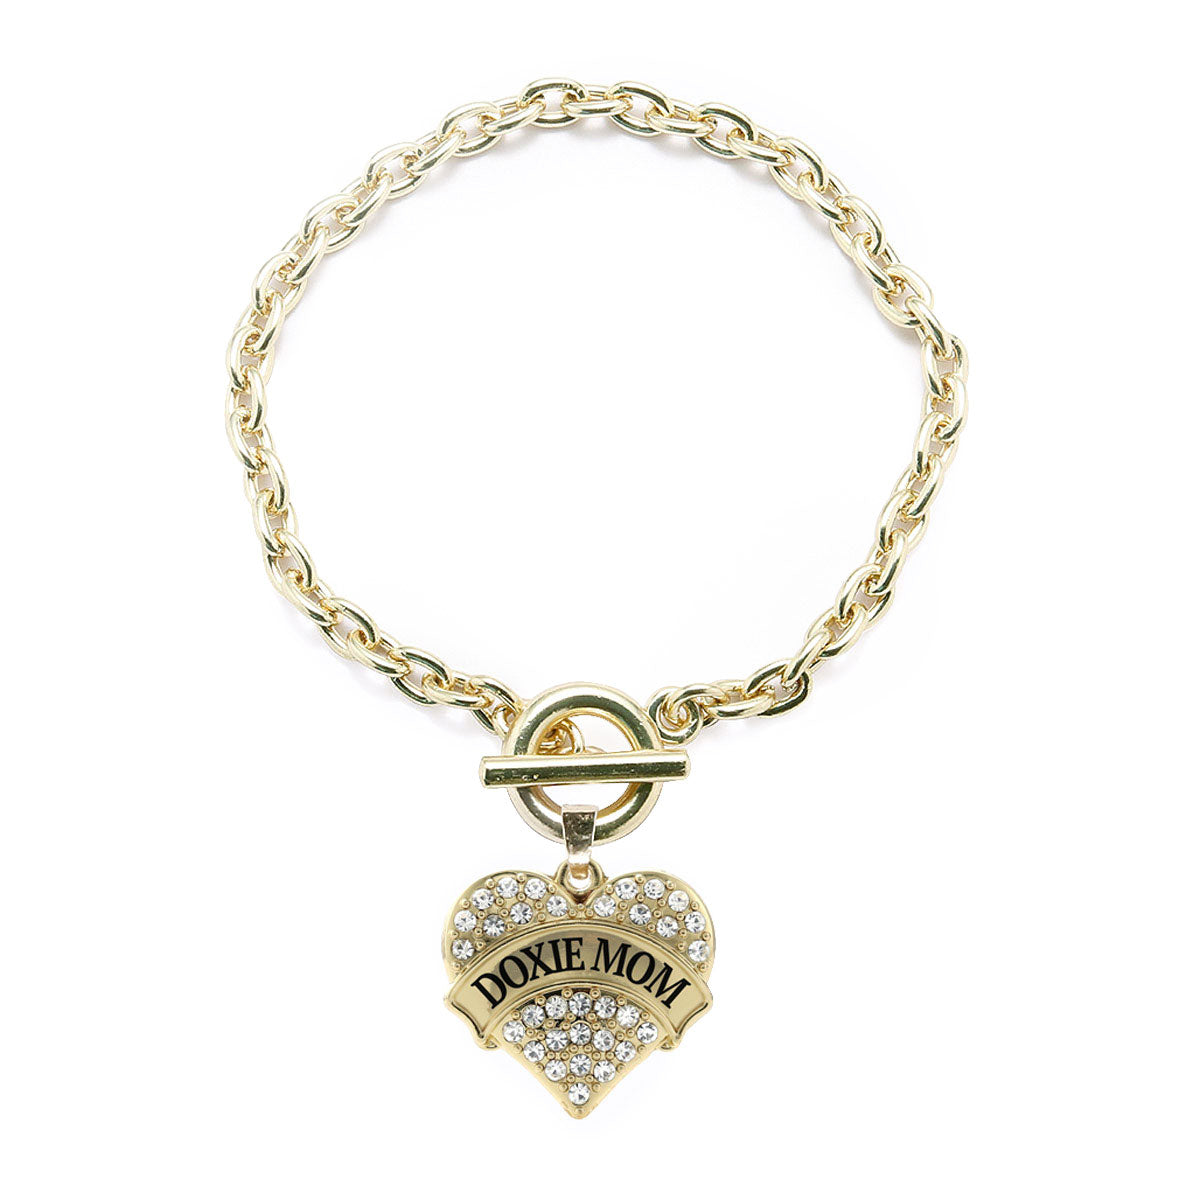 Gold Doxie Mom Pave Heart Charm Toggle Bracelet